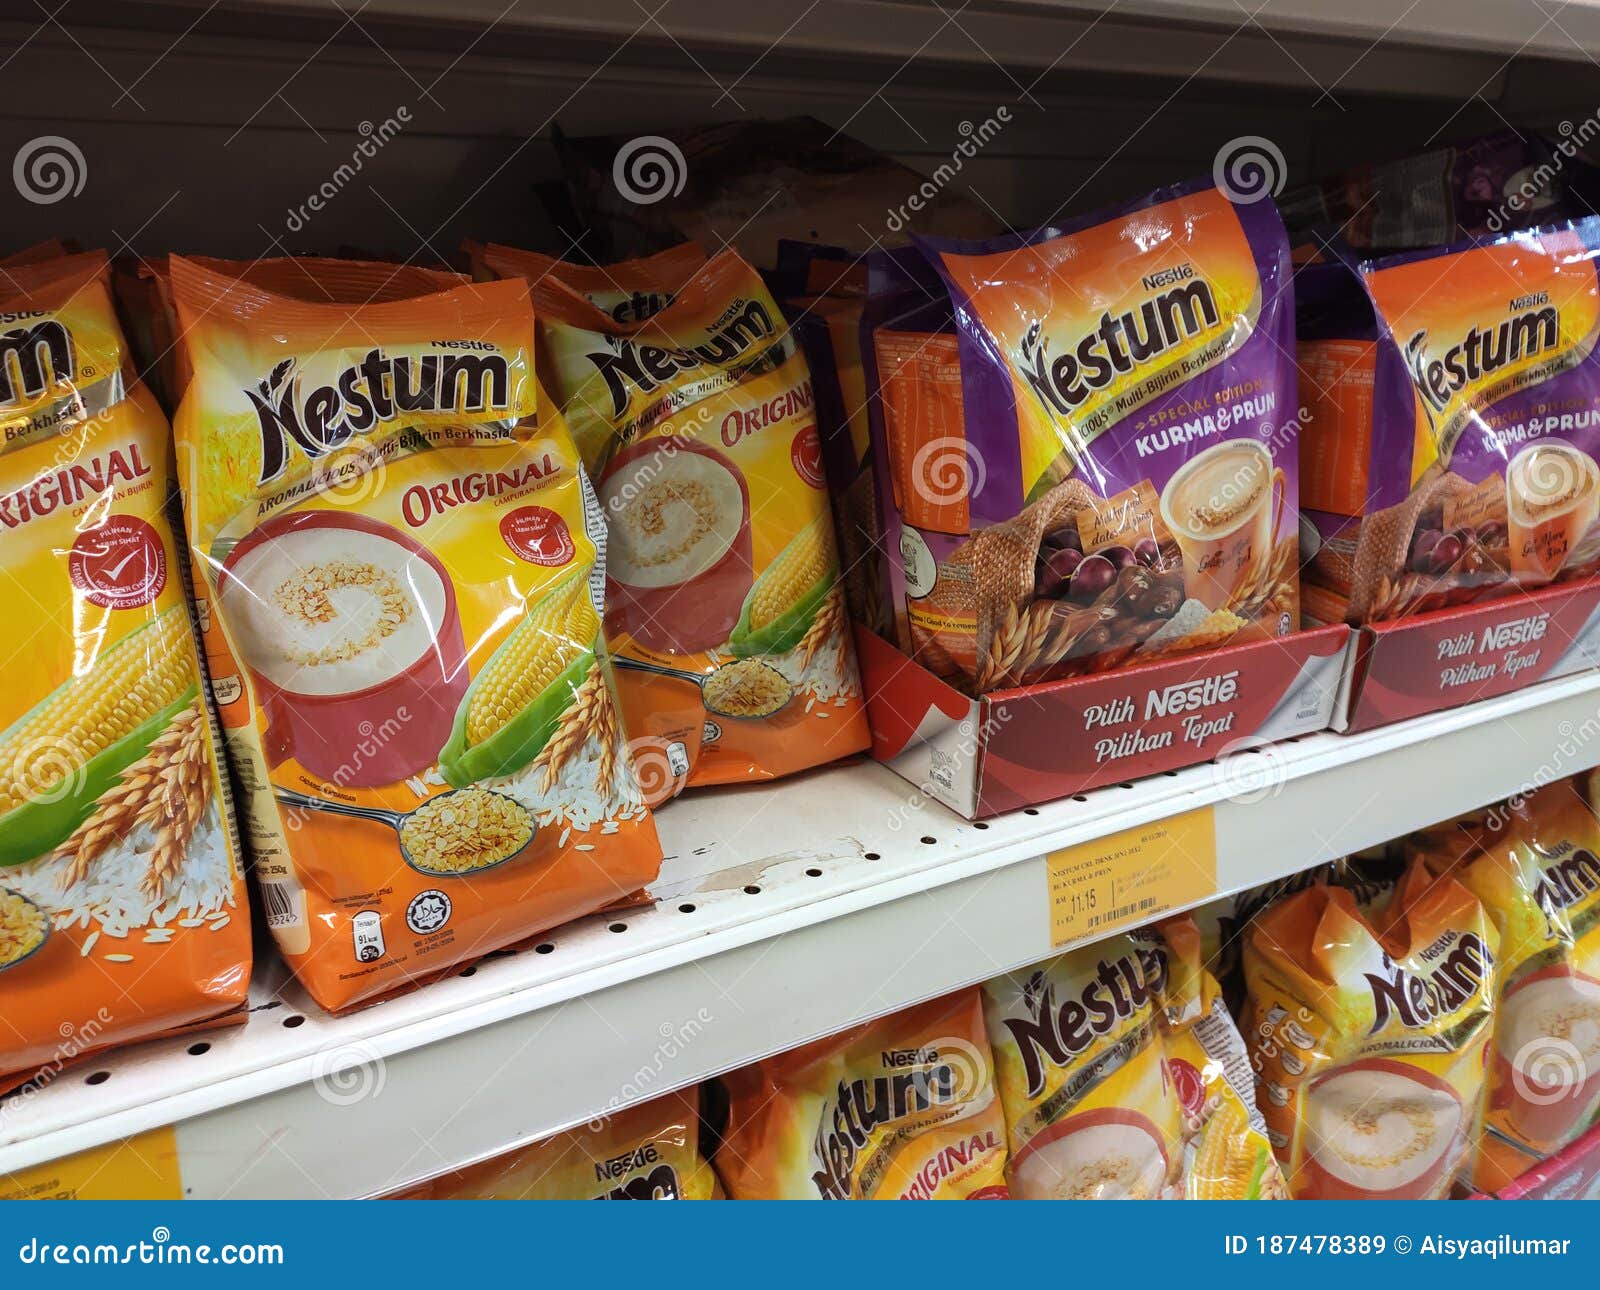 Nestum Mix Grain Nestum by Nestle. Comes with a Variety of Flavour